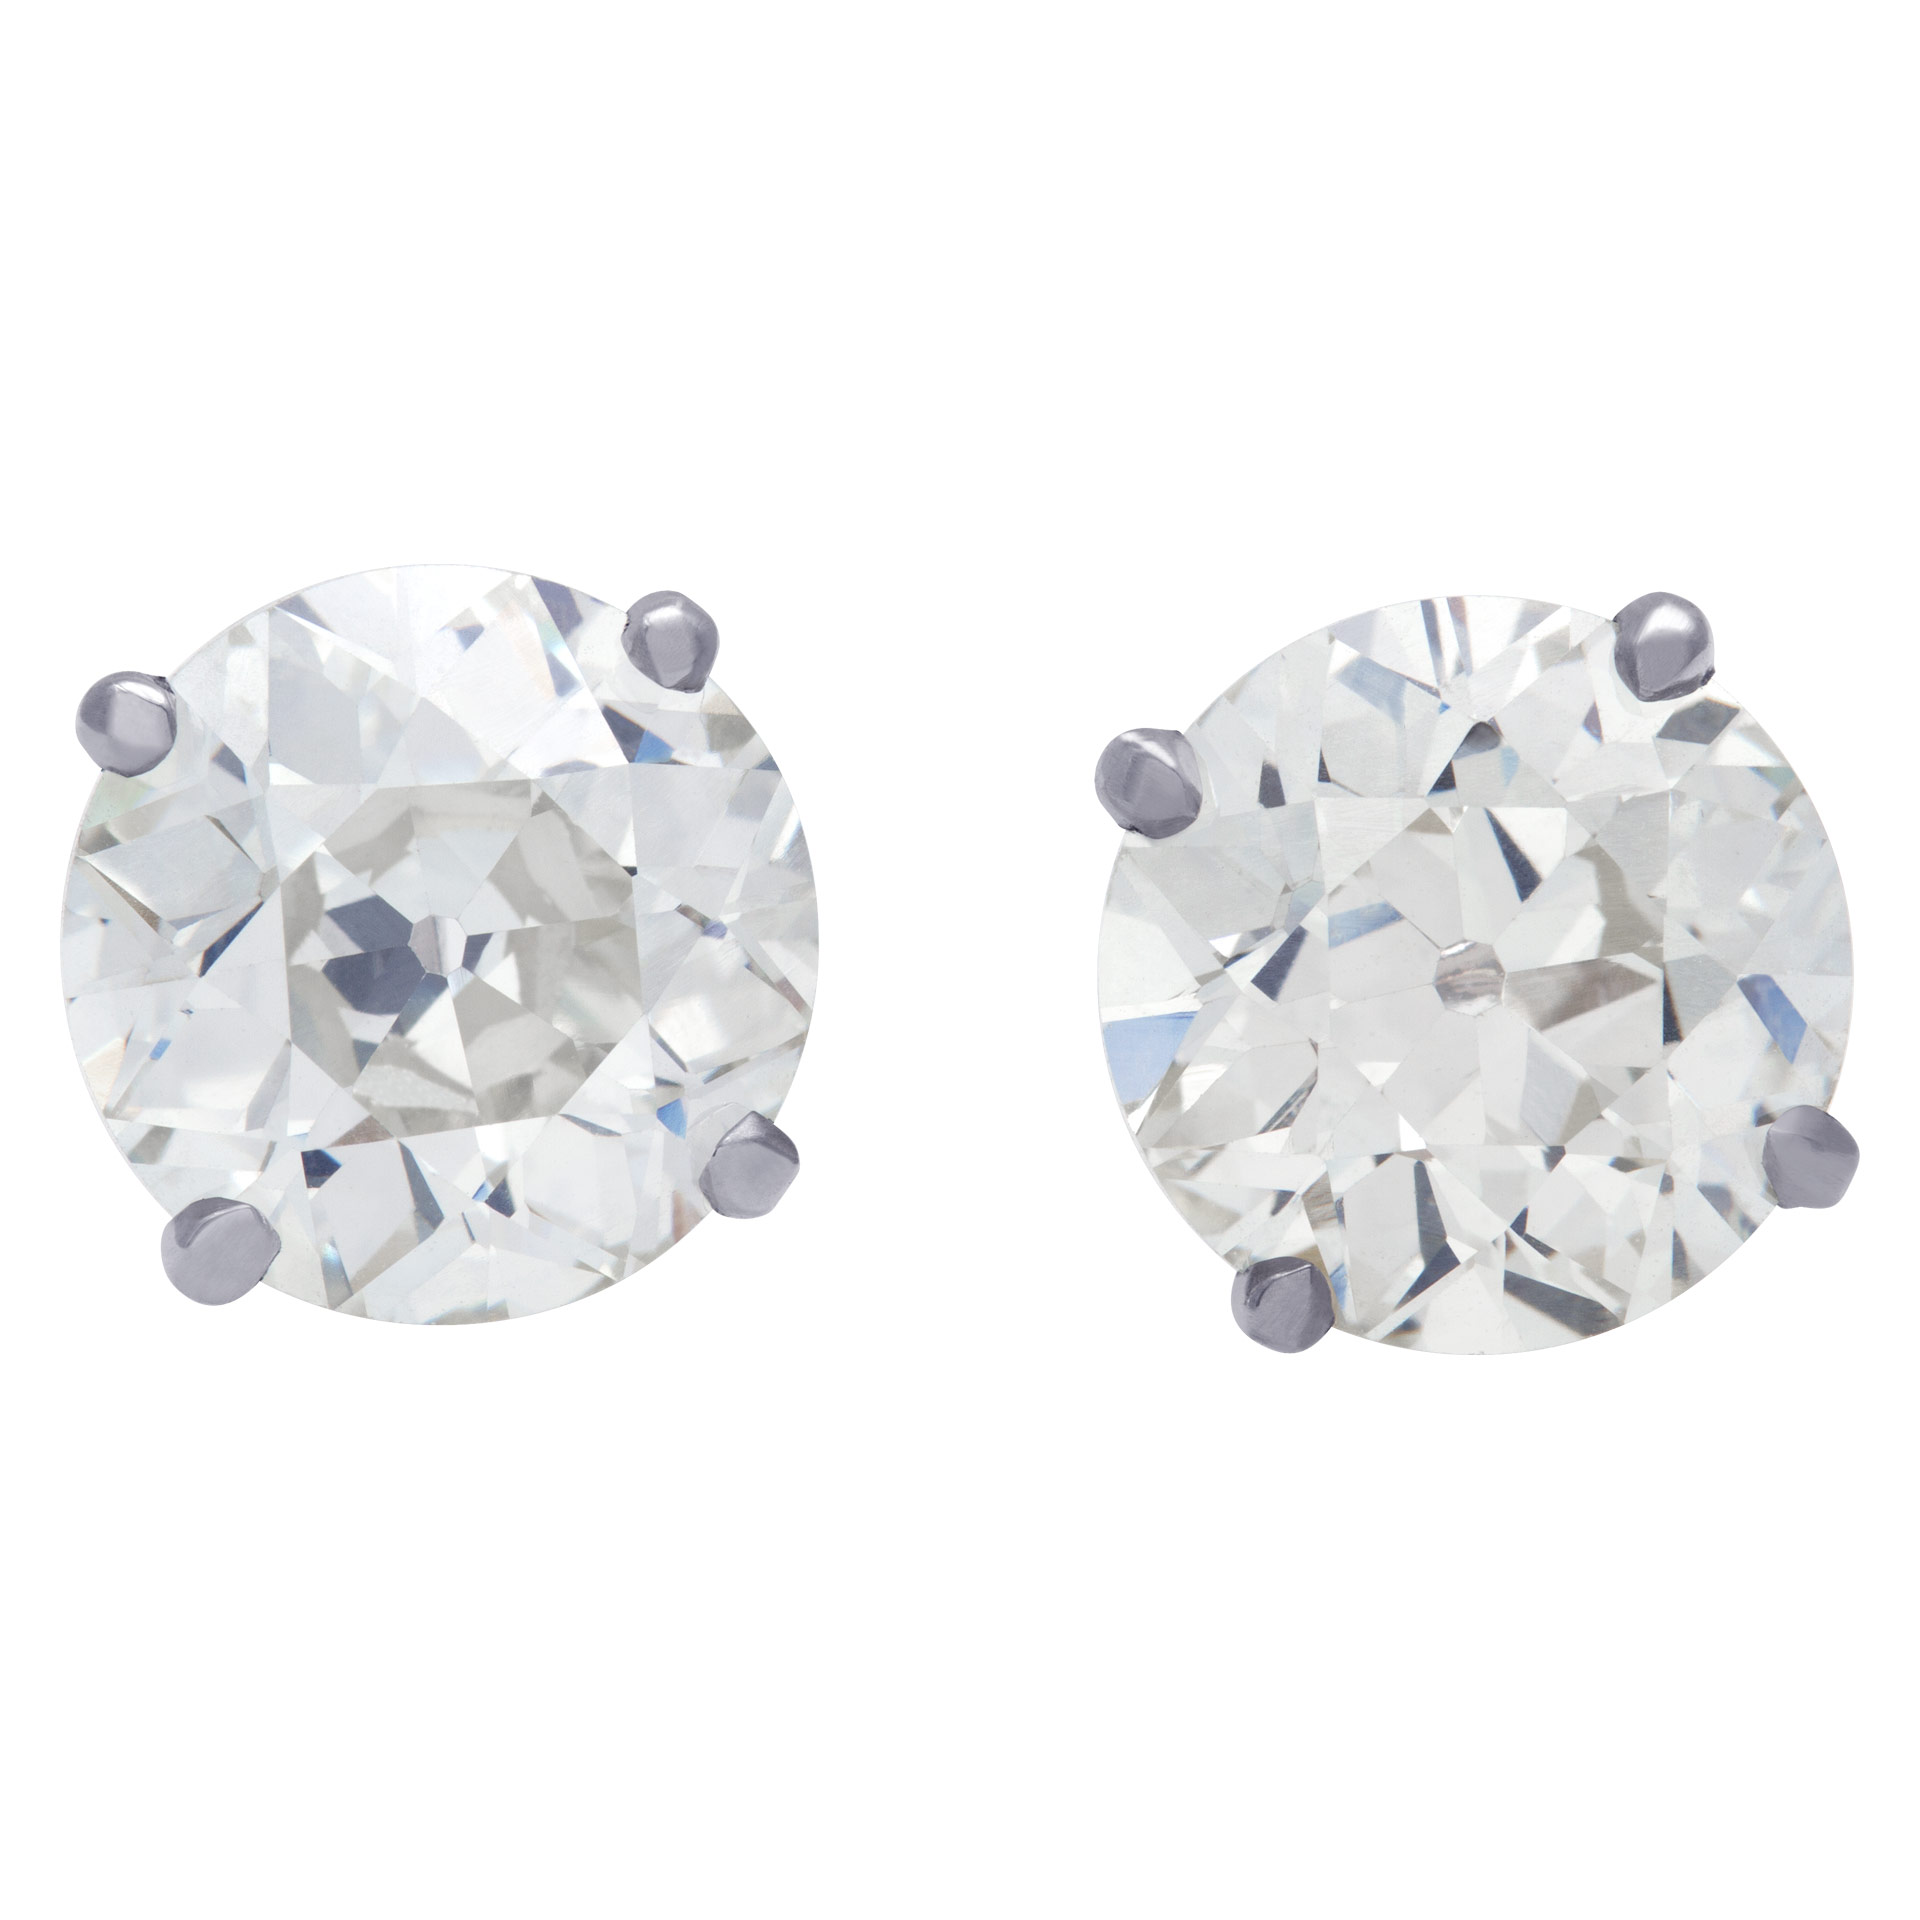 GIA certified round brilliant diamonds studs 2.74 cts (Q to R range in color, VS1 clarity) & 2.80 cts ( S to T range color, VS2 clarity) set in 18k white gold.